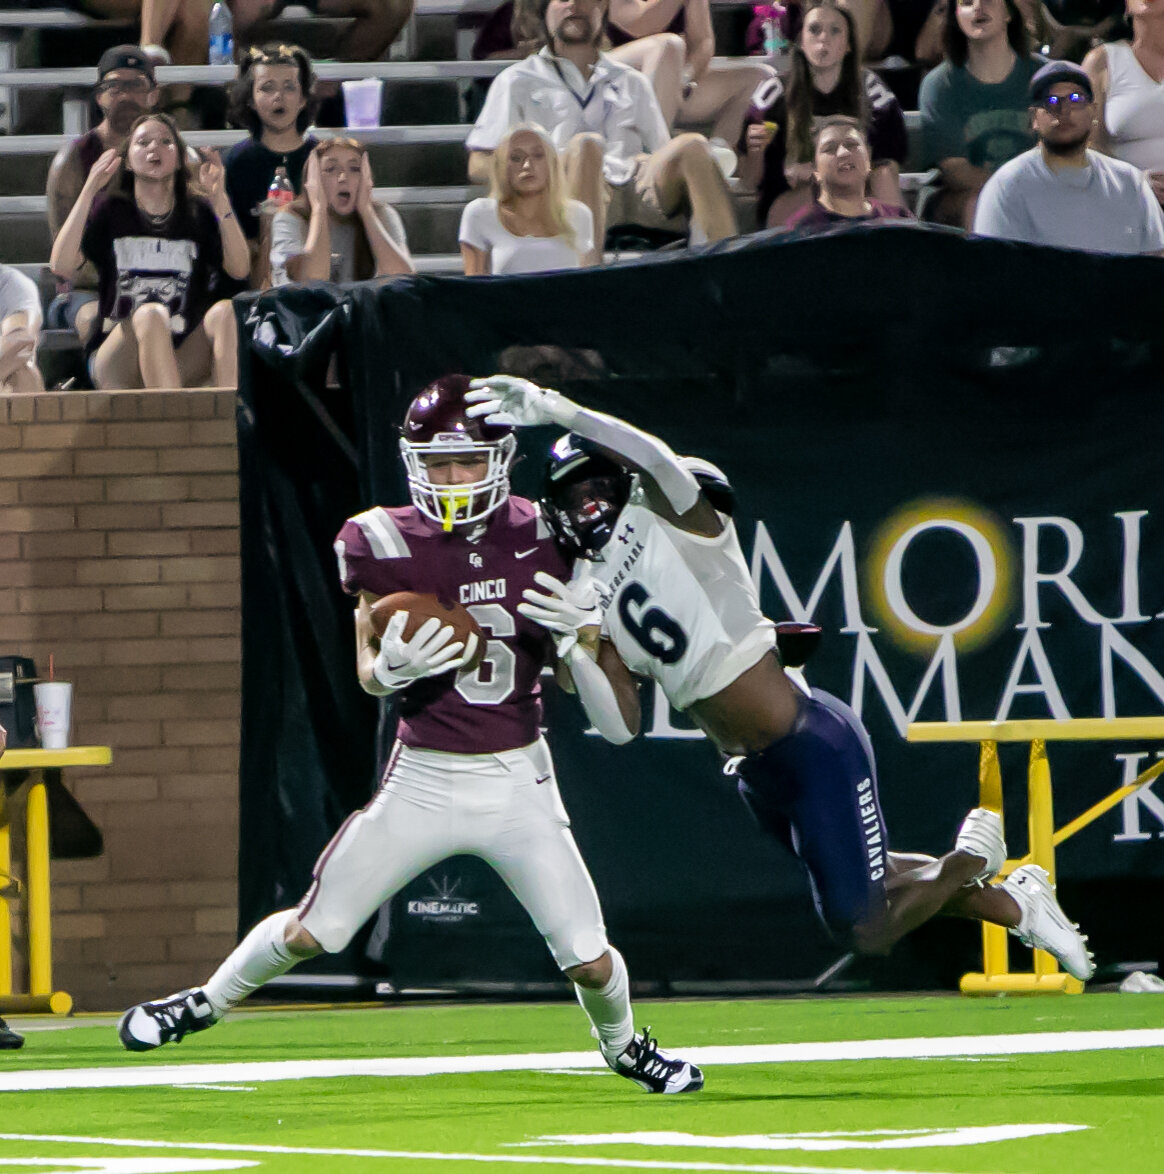 Scott Eckel hauls in a one-handed catch on the sideline during Friday's game between Cinco Ranch and College Park at Rhodes Stadium.